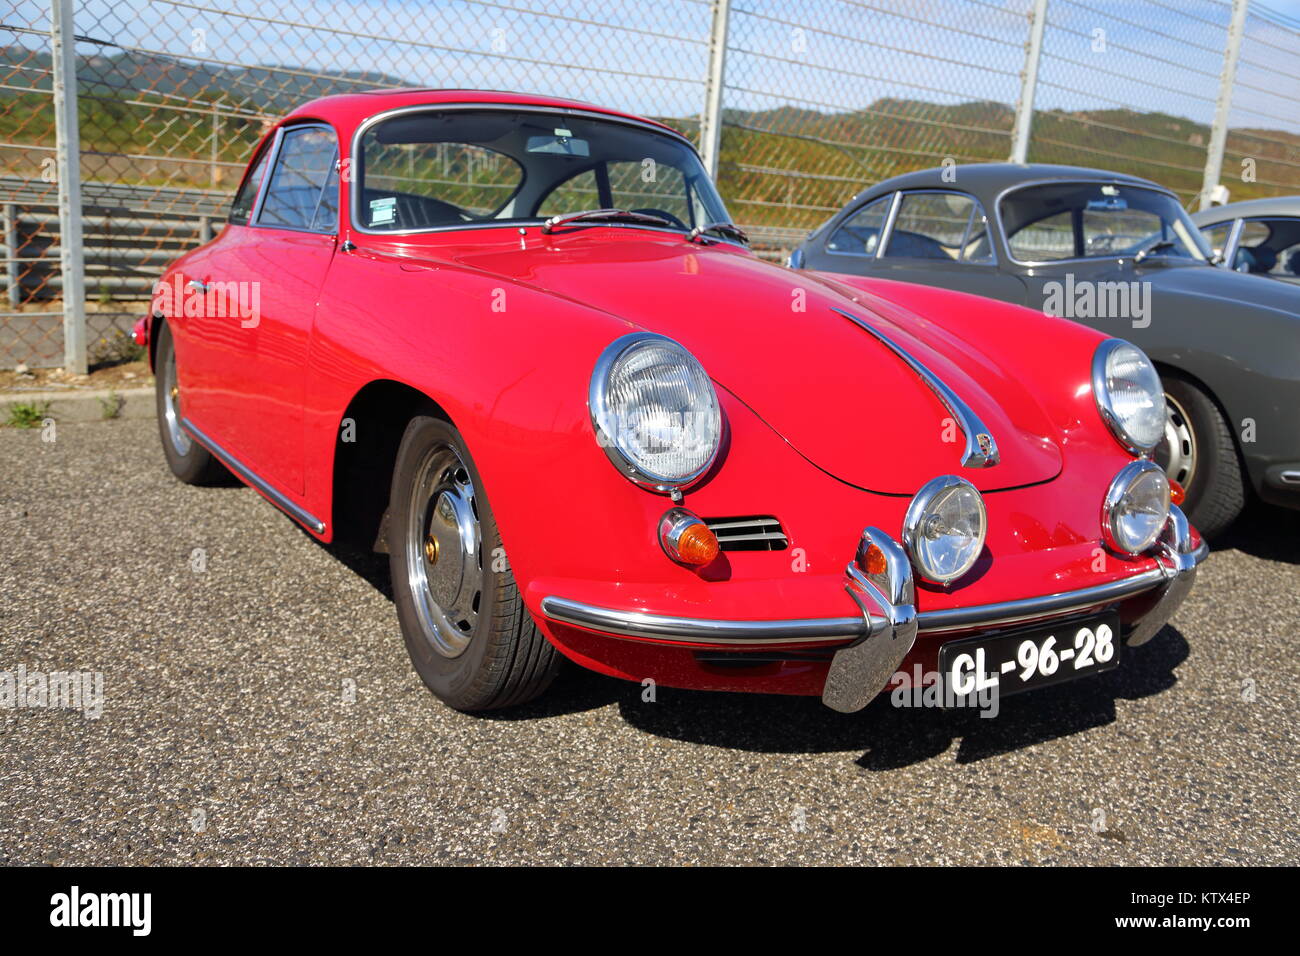 A vintage red Porsche 356 at the Estoril Race Course in Portugal Stock Photo